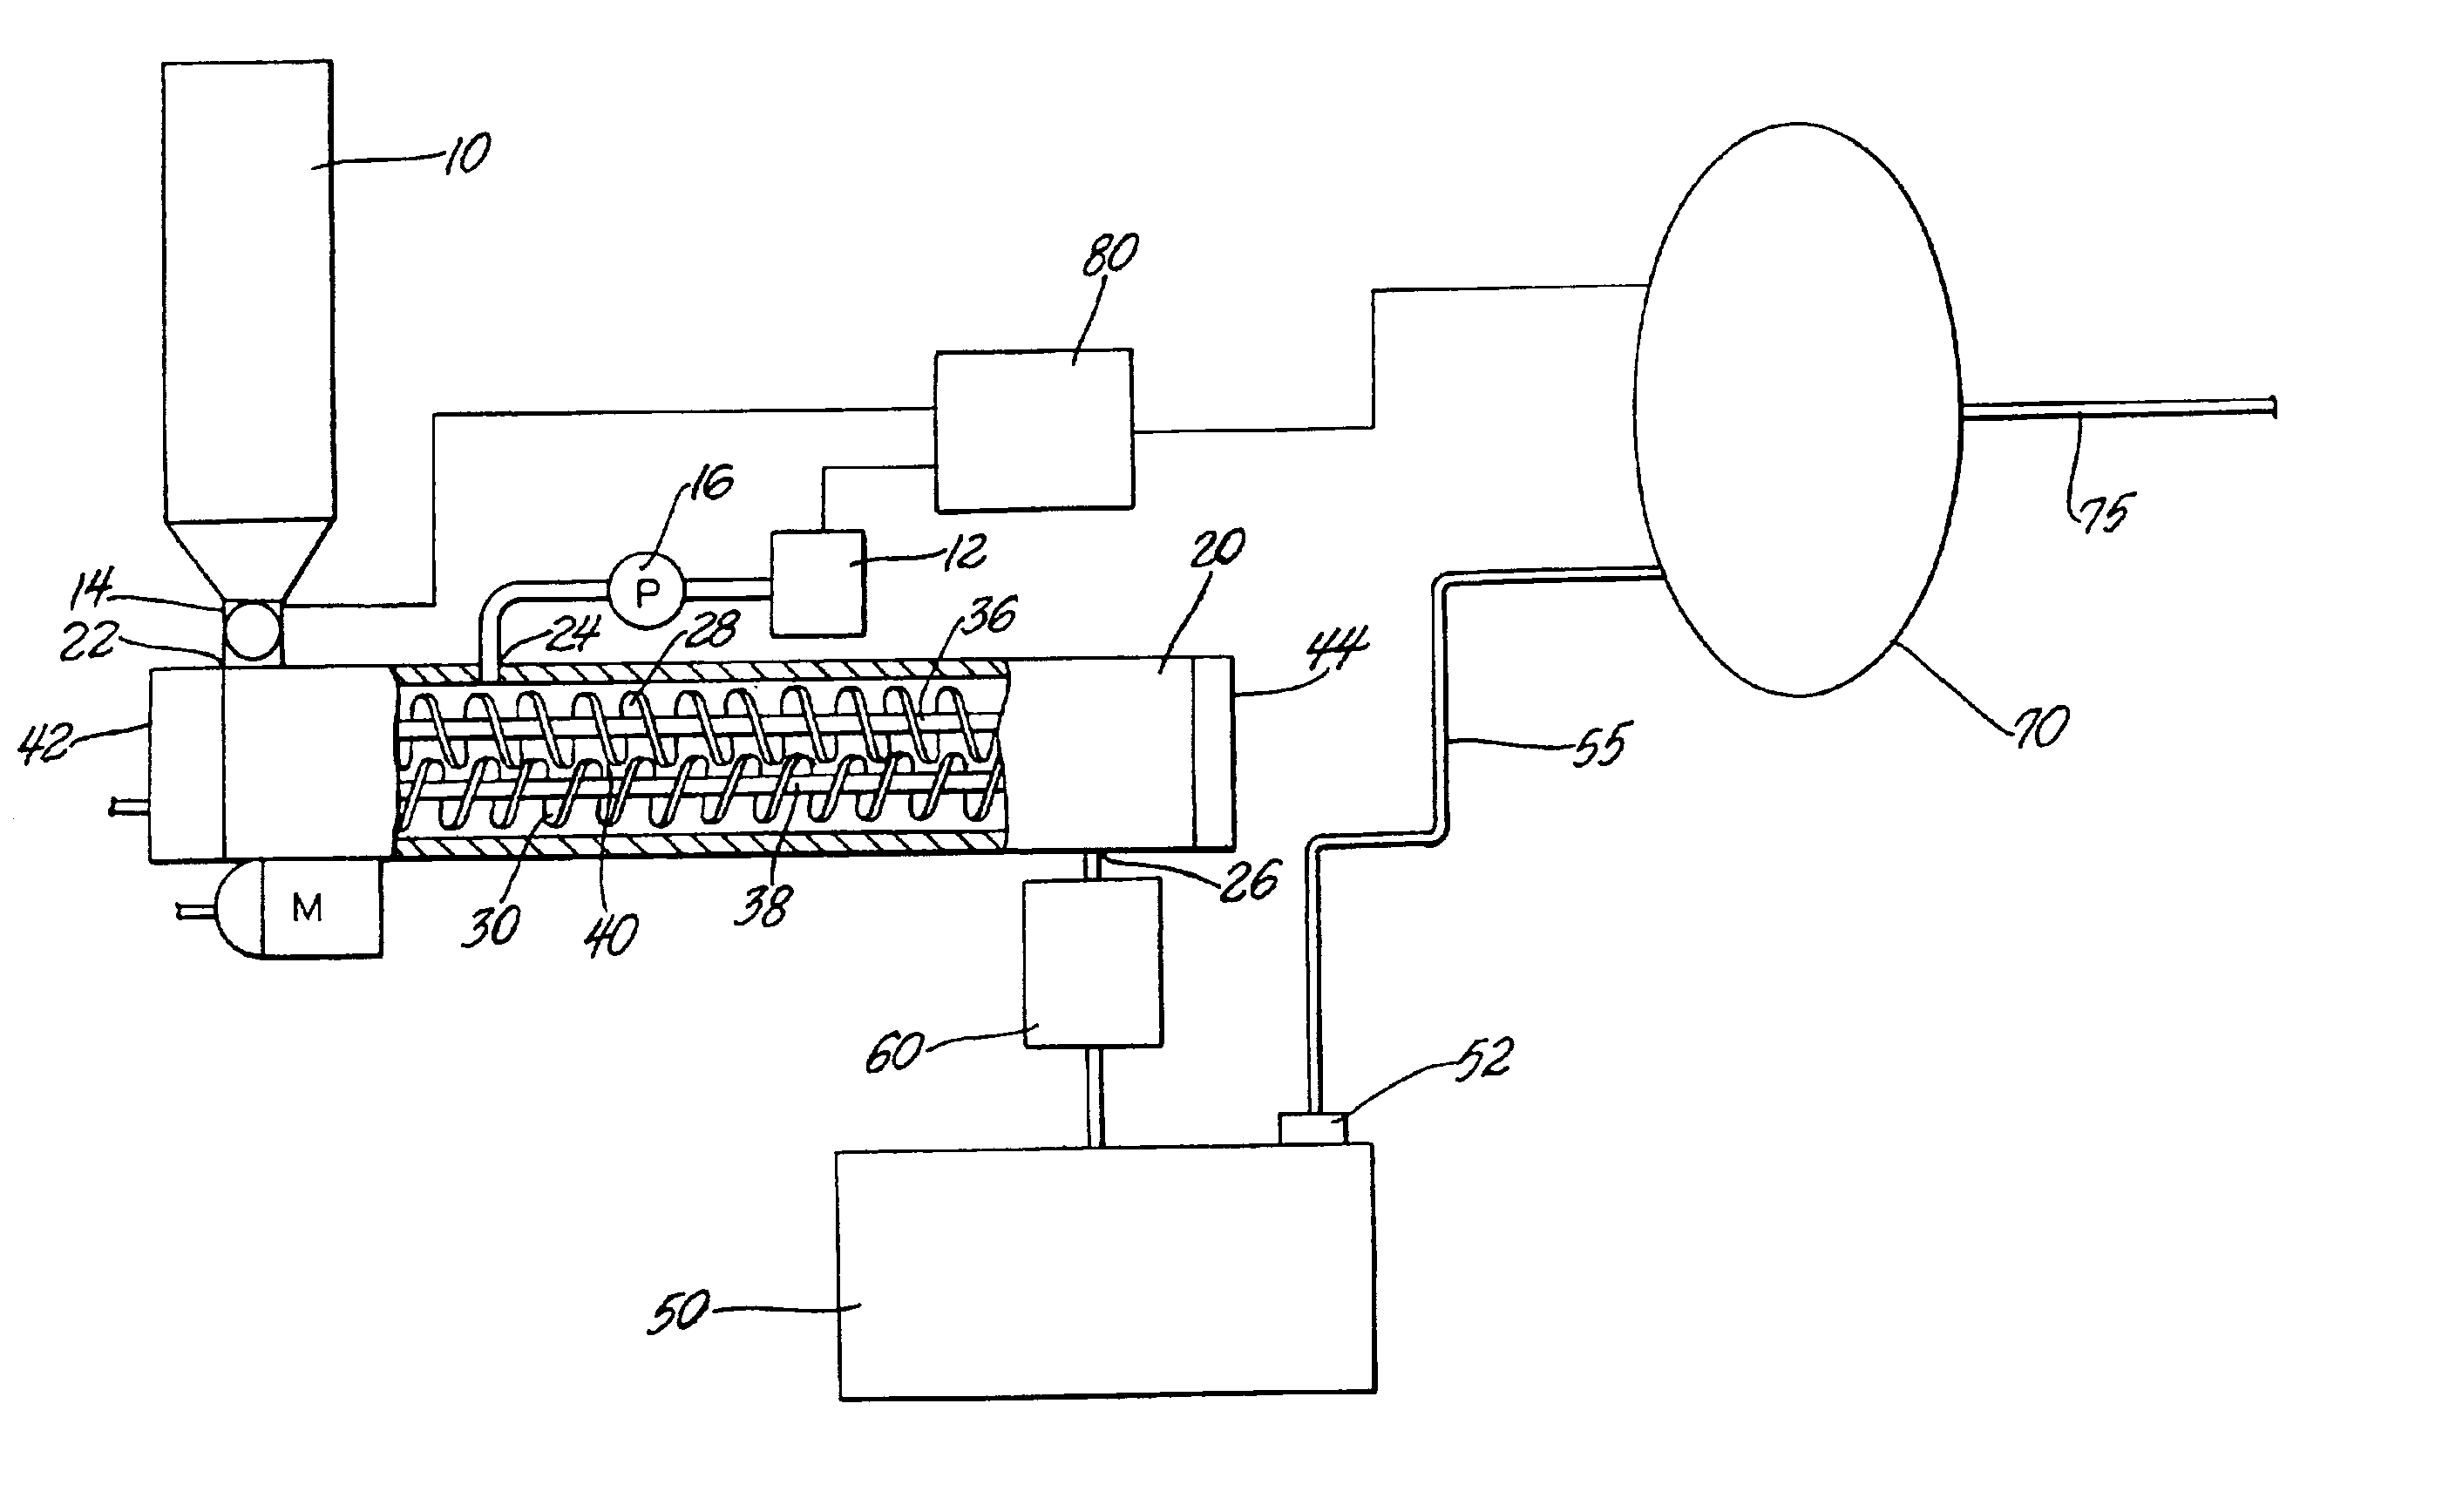 Method of generating hydrogen from borohydrides and water